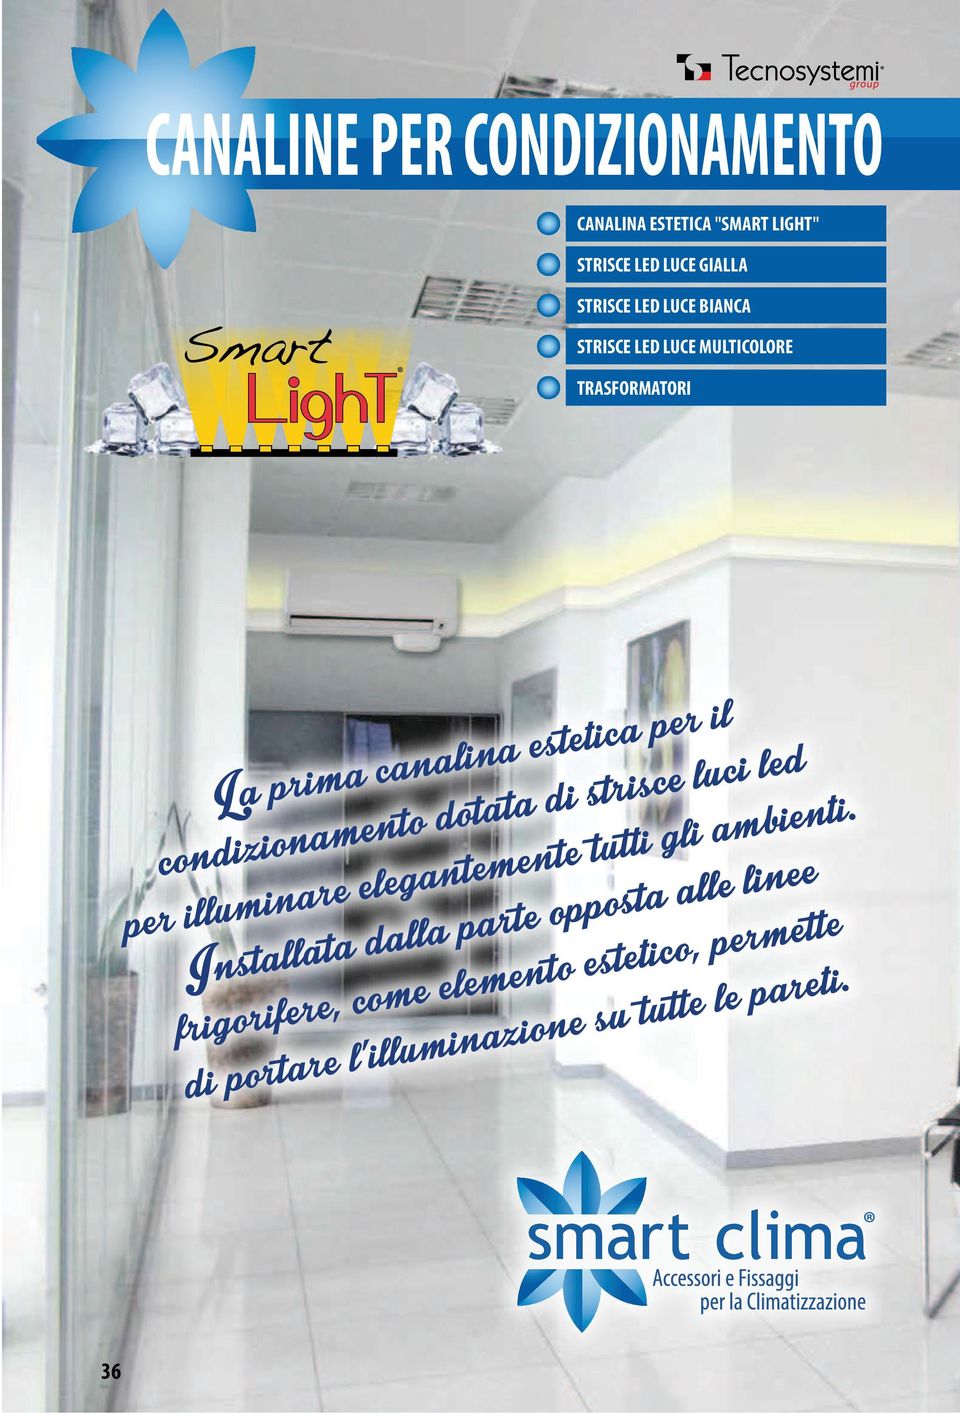 LUCE GIALLA STRISCE LED LUCE BIANCA